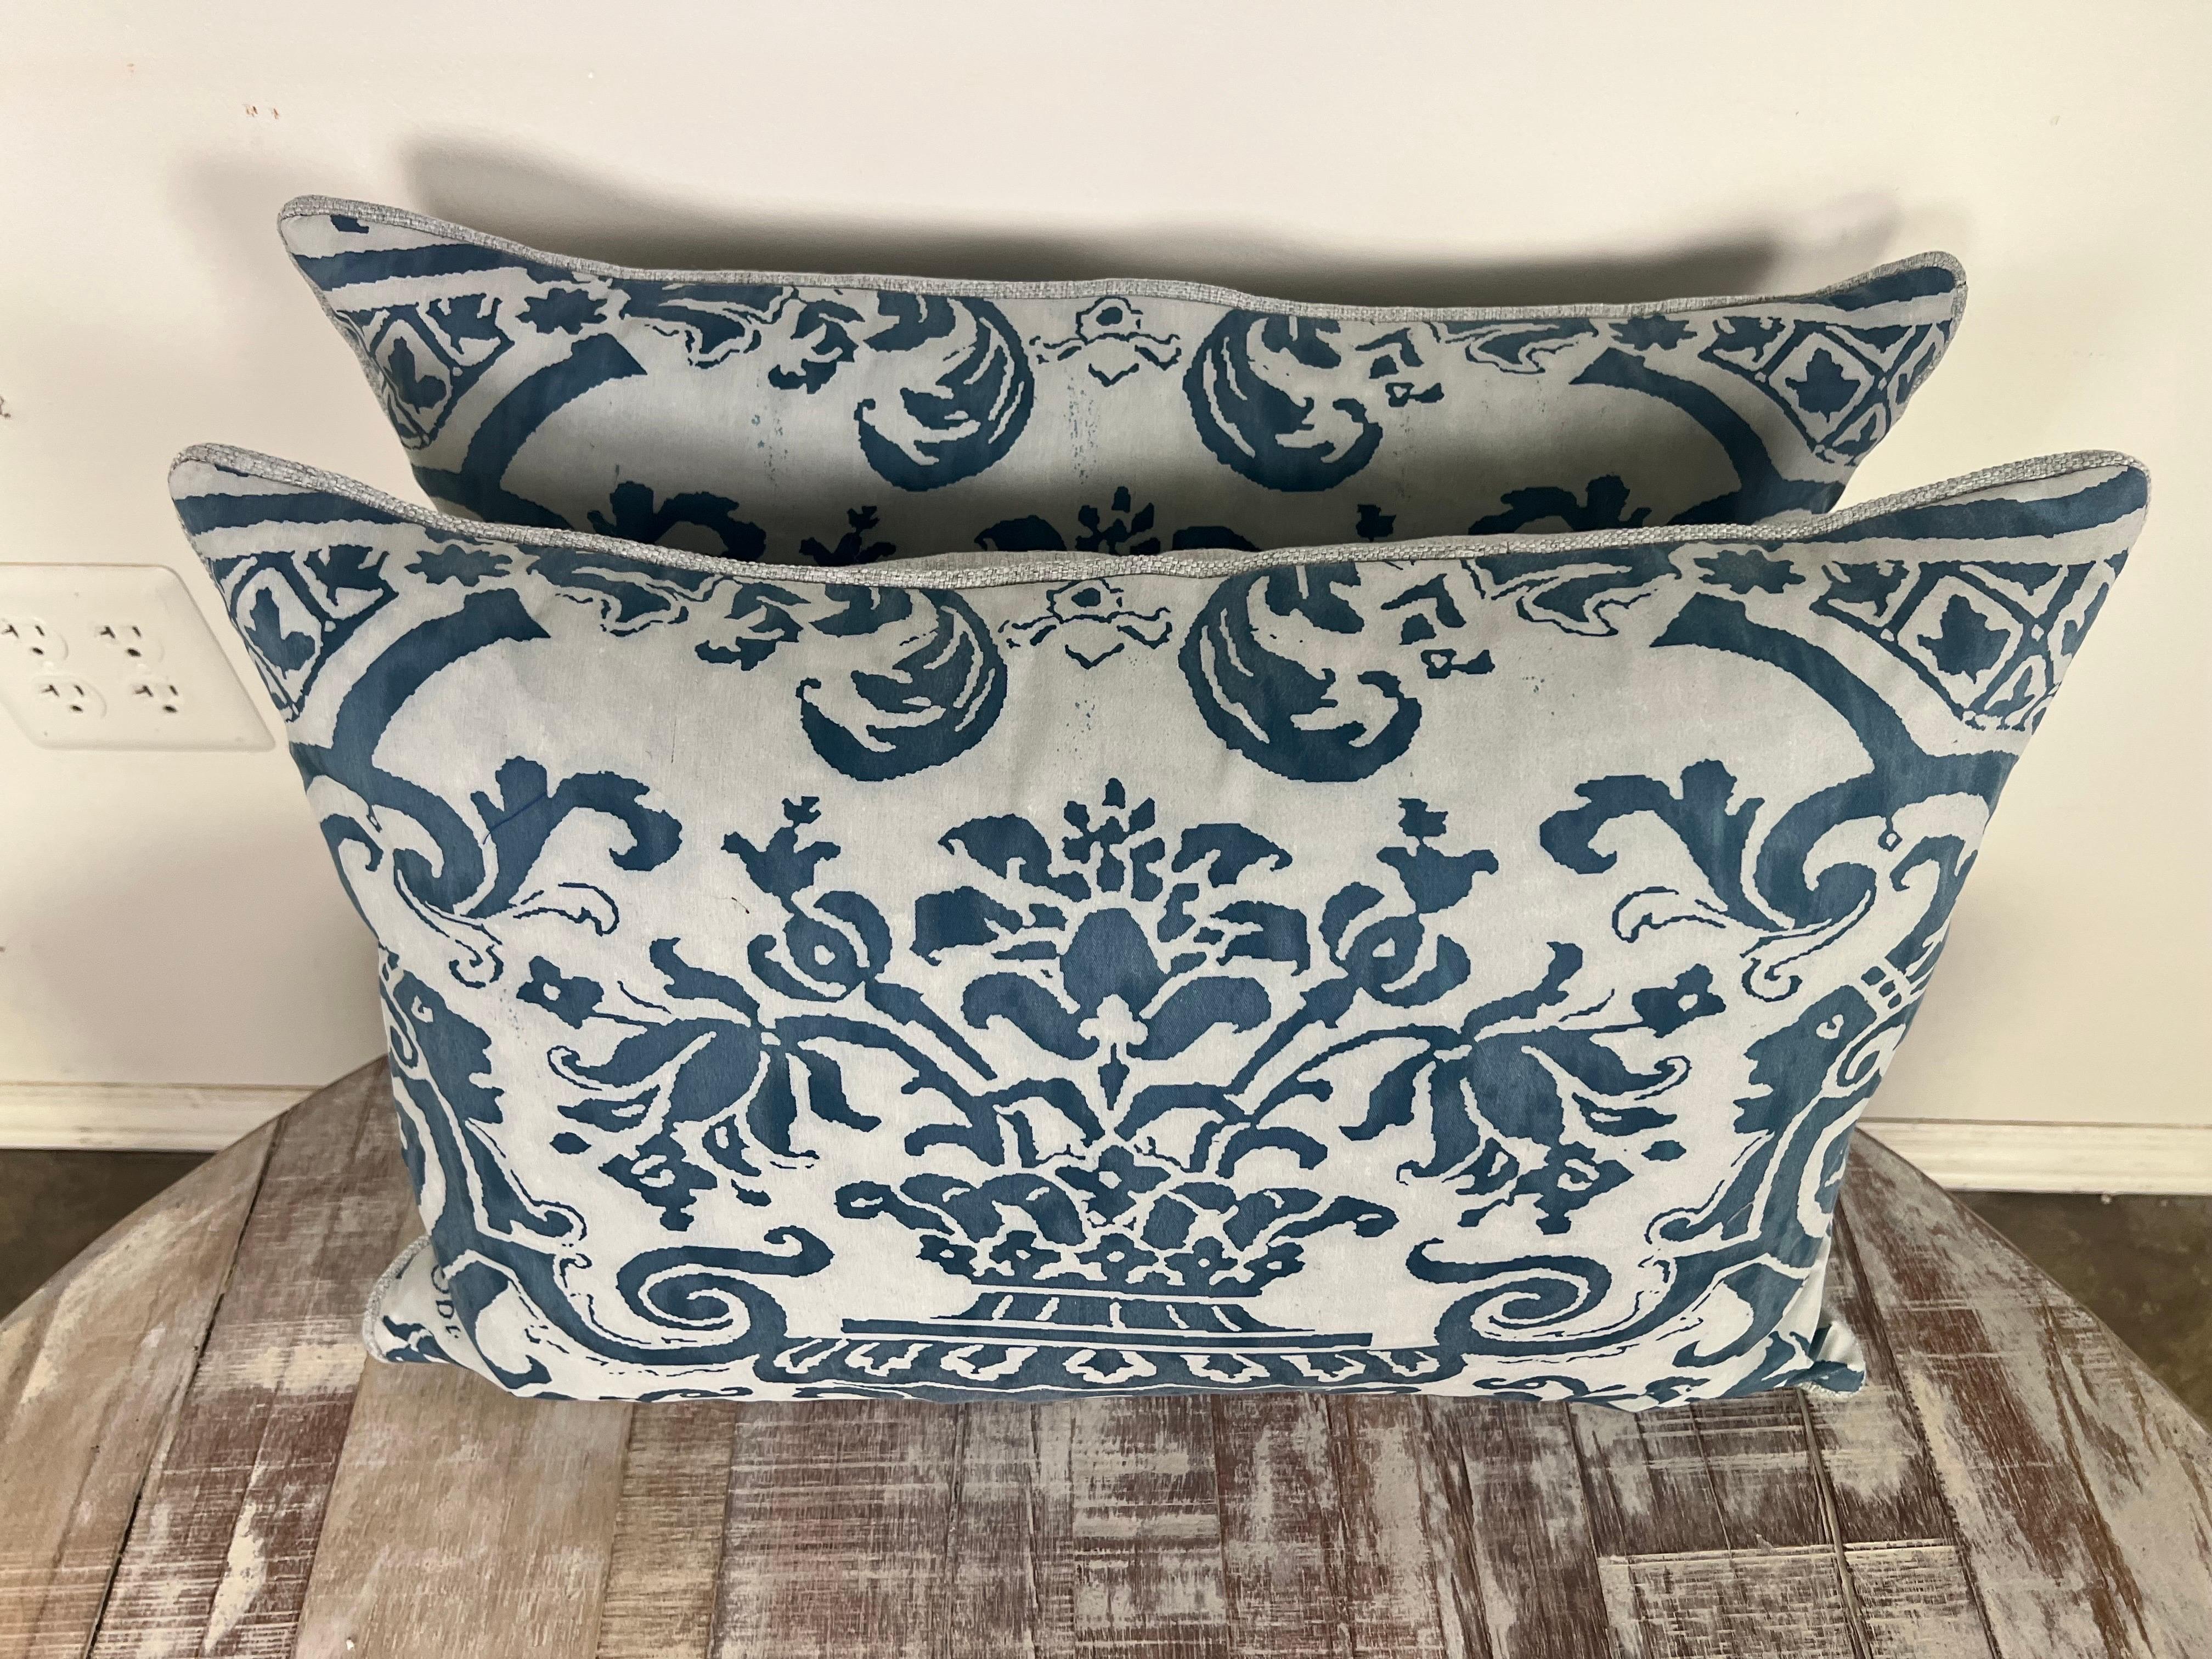 Pair of blue & white Fortuny cotton pillows with oatmeal colored Belgium linen backs. Down filled inserts, hidden zipper closures.